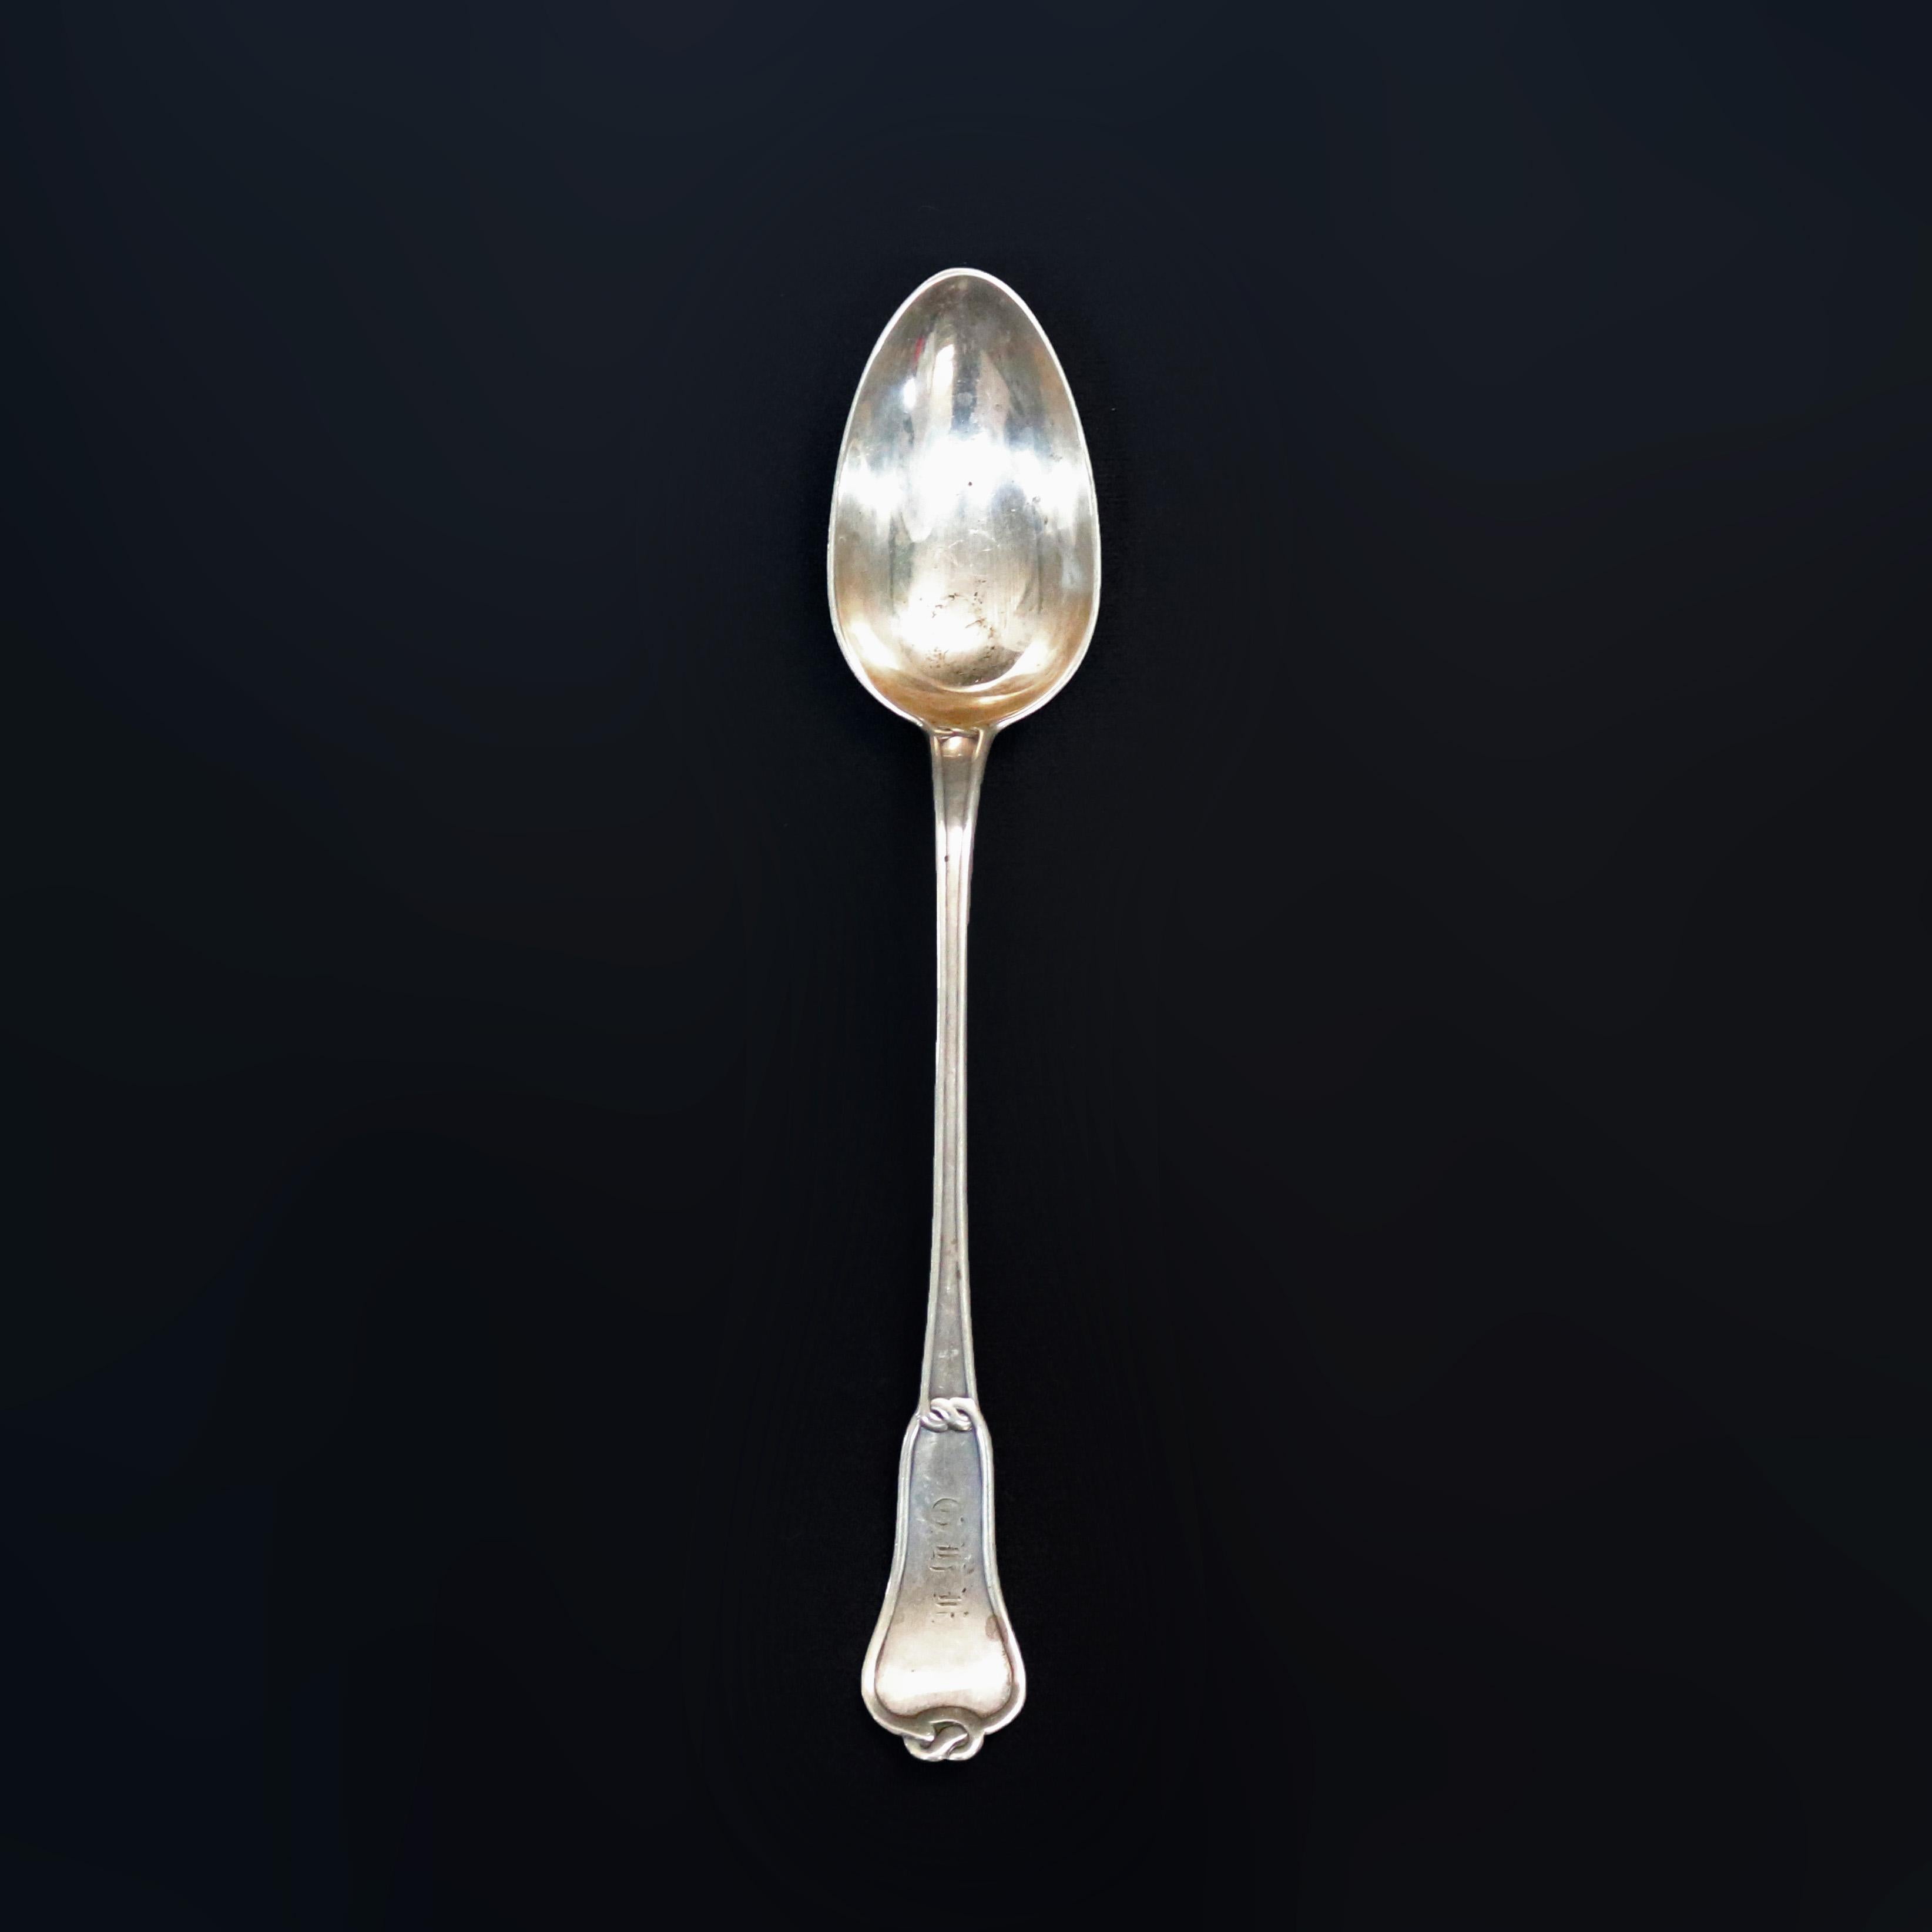 An antique sterling silver basting spoon by Tiffany & Co. offers rope or pretzel twist handle with monogram and maker stamp as photographed, circa 1901

Measures; 12.5